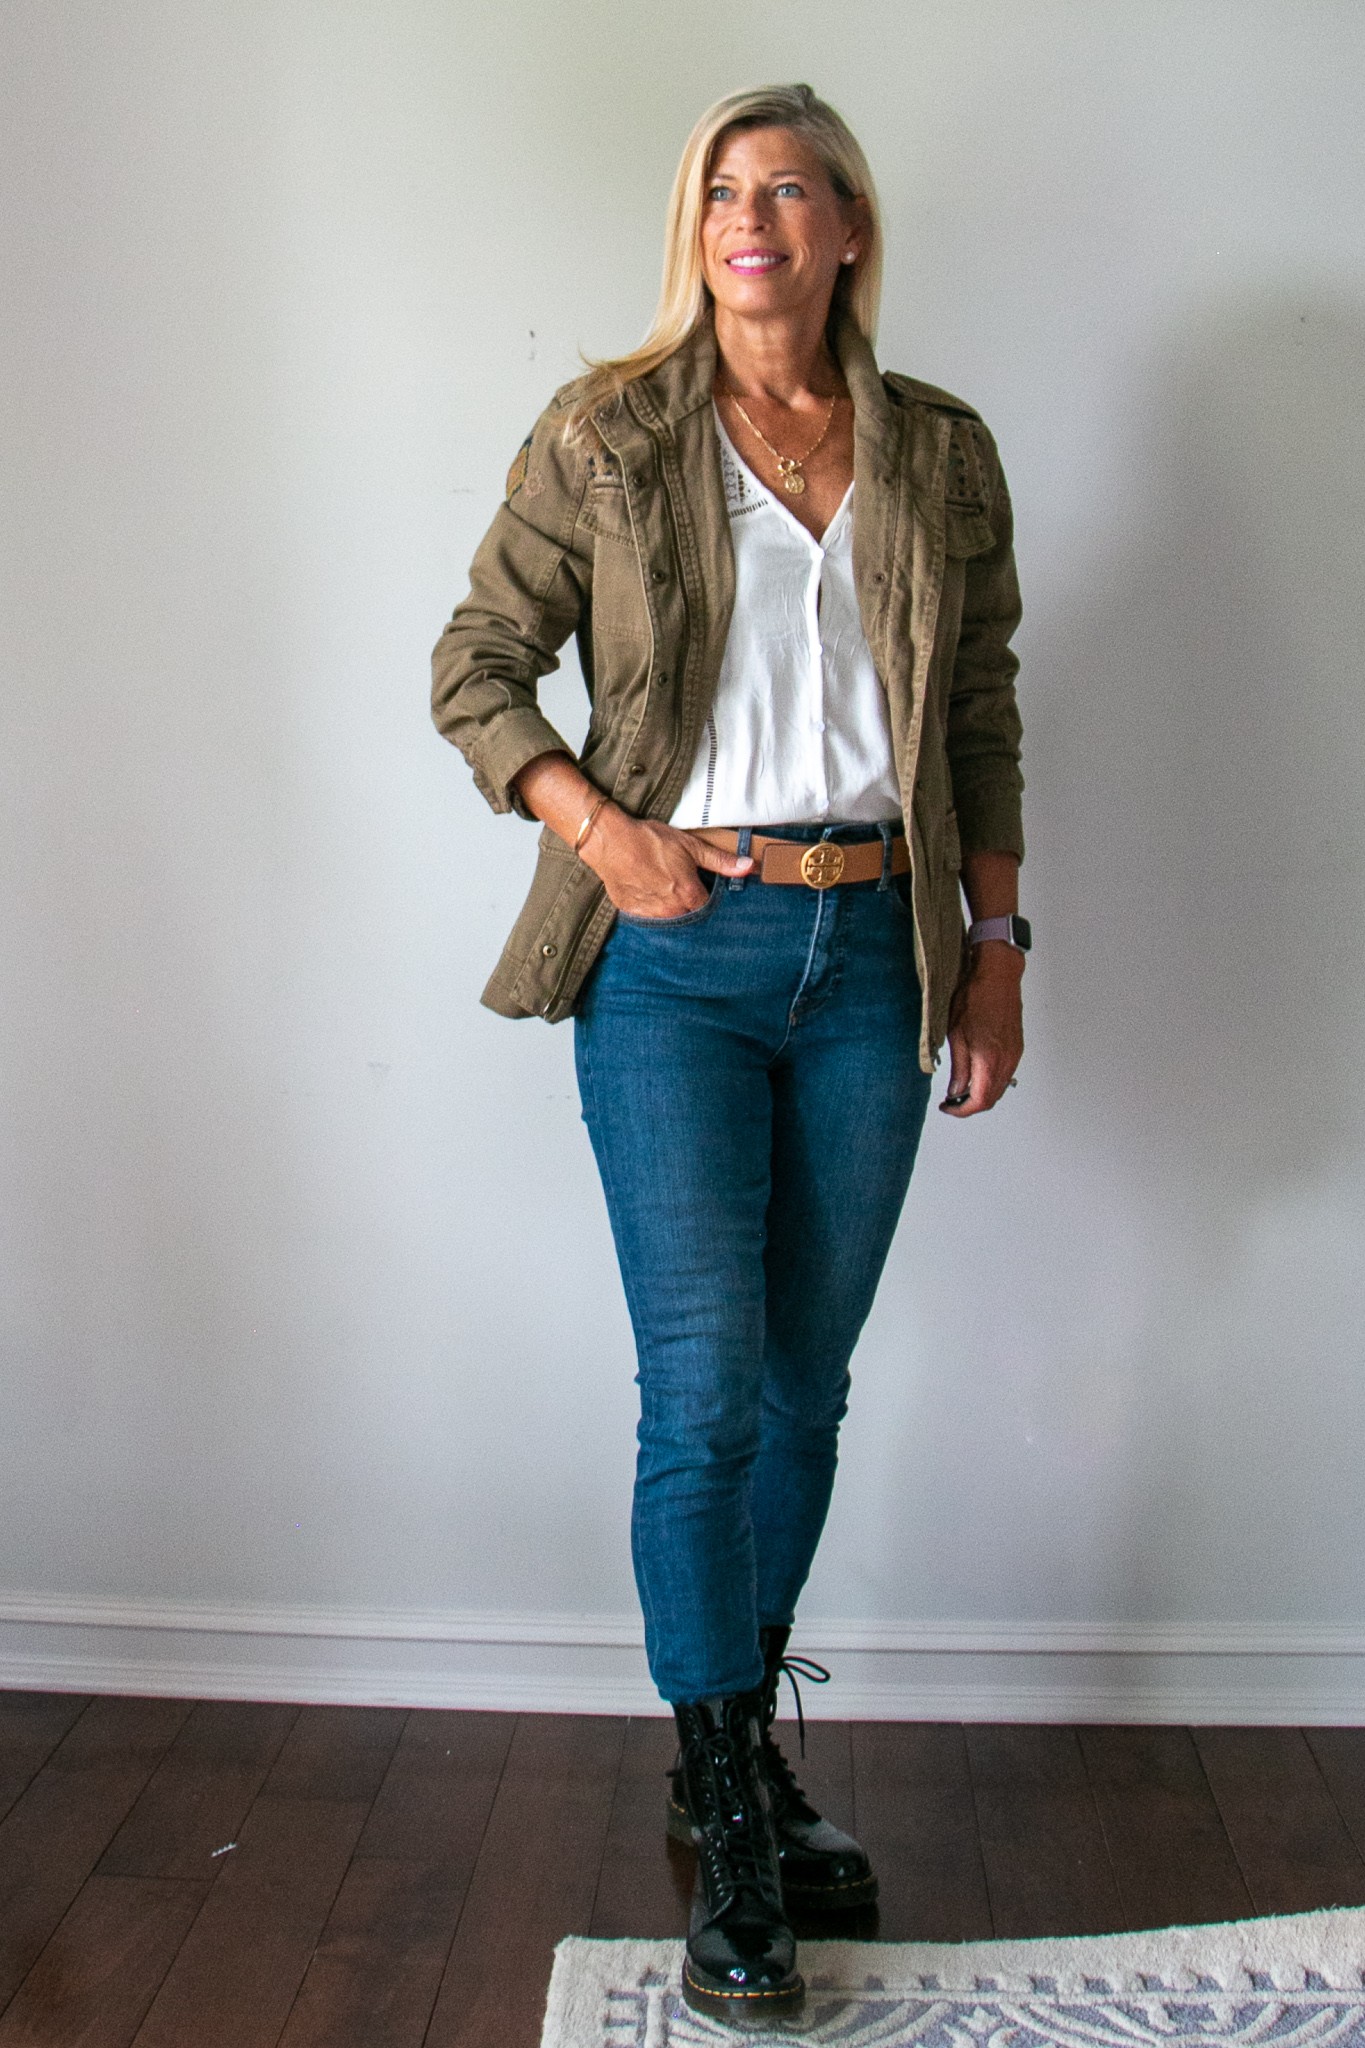 Utility Jacket Outfit with Jeans